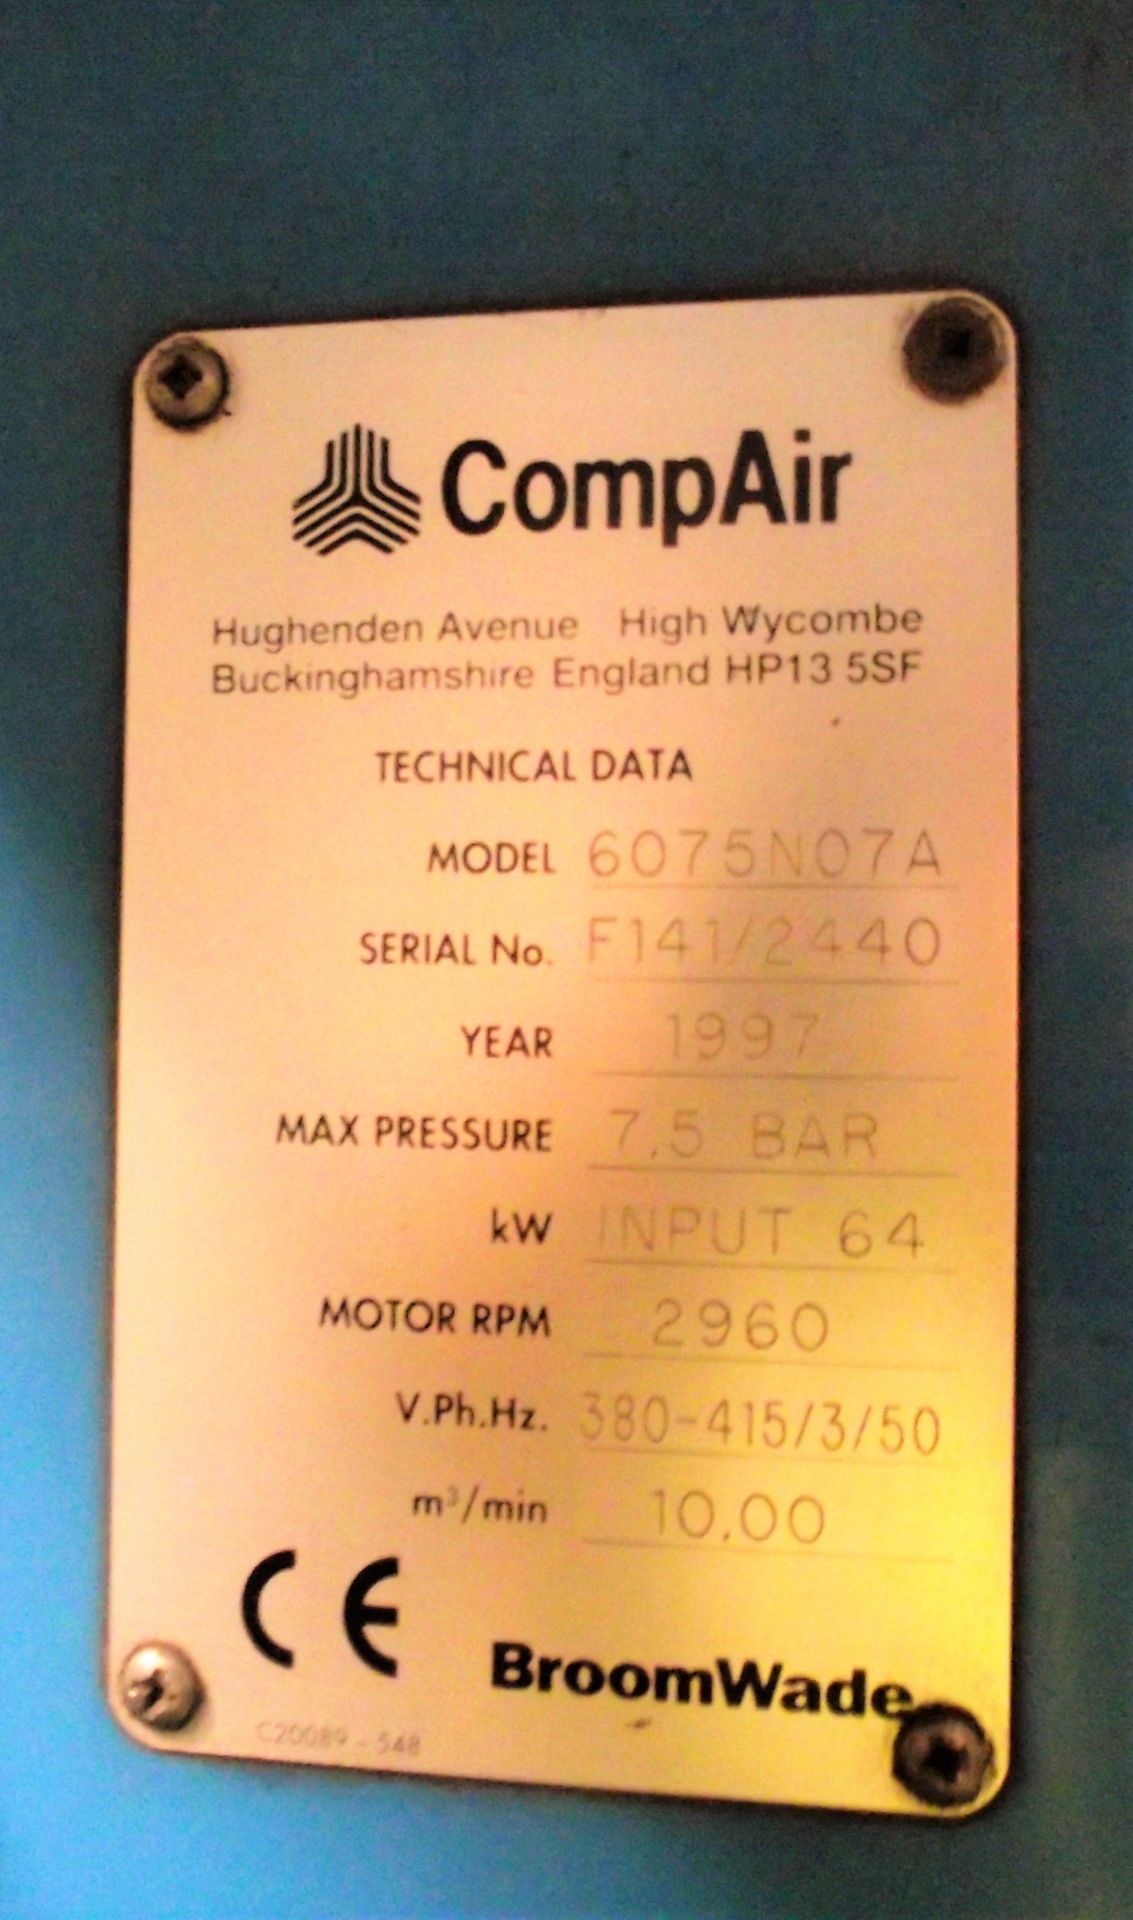 Compair Broomwade Air Compressor - Image 2 of 5